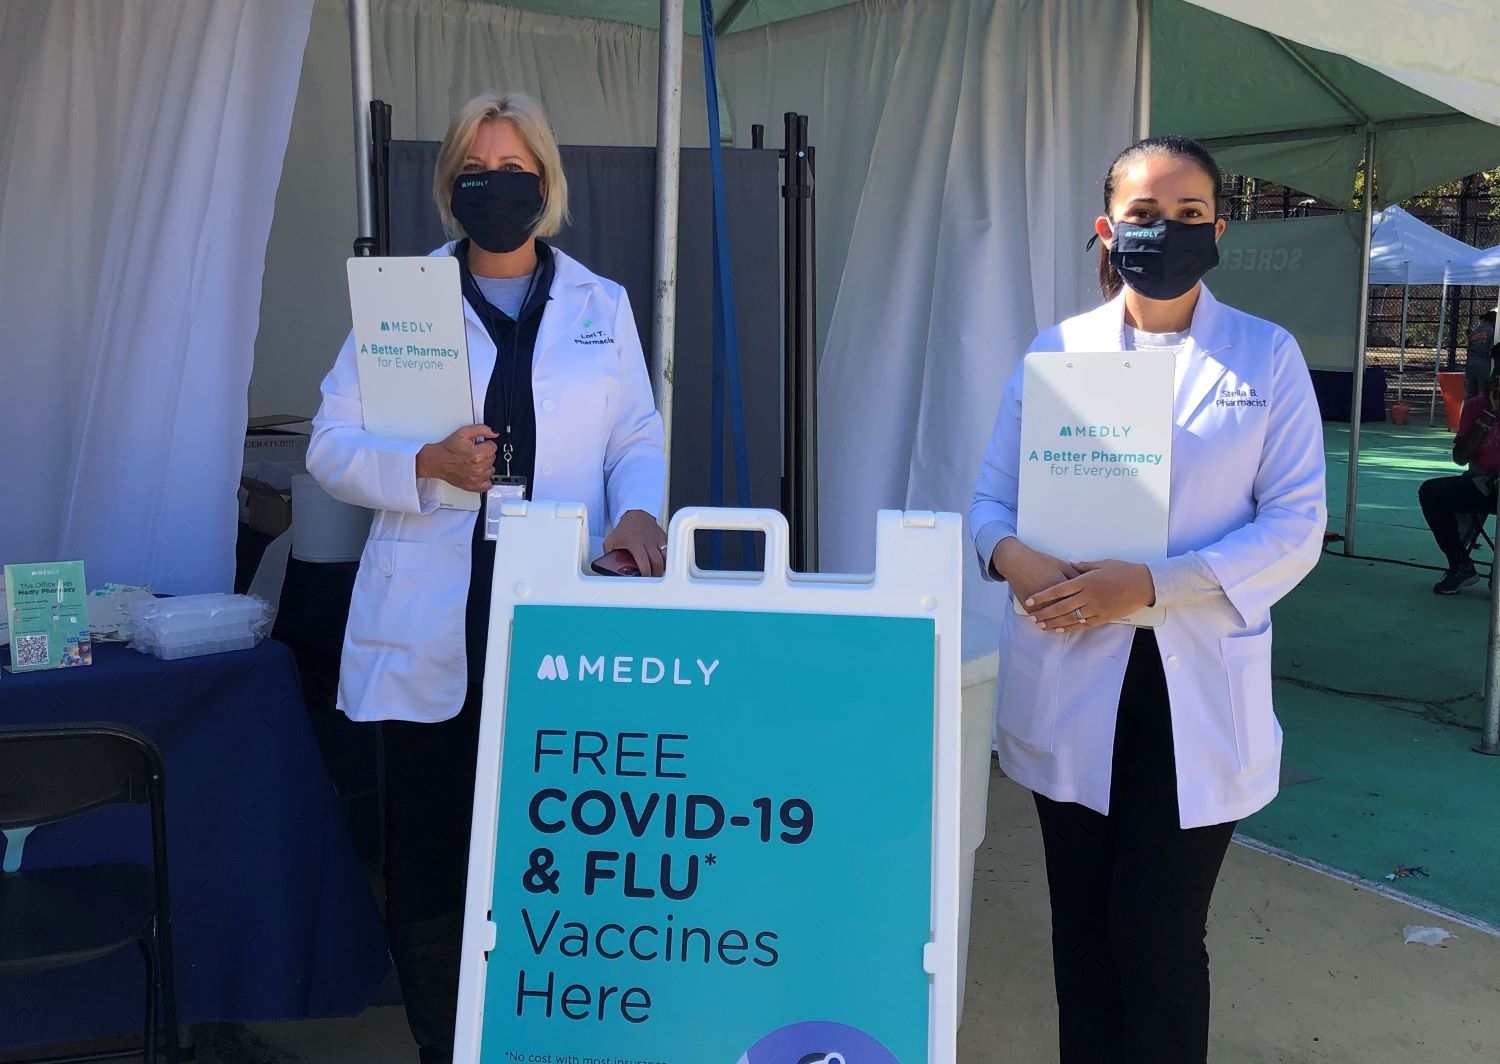 Medly Pharmacy staff at a COVID vaccine site